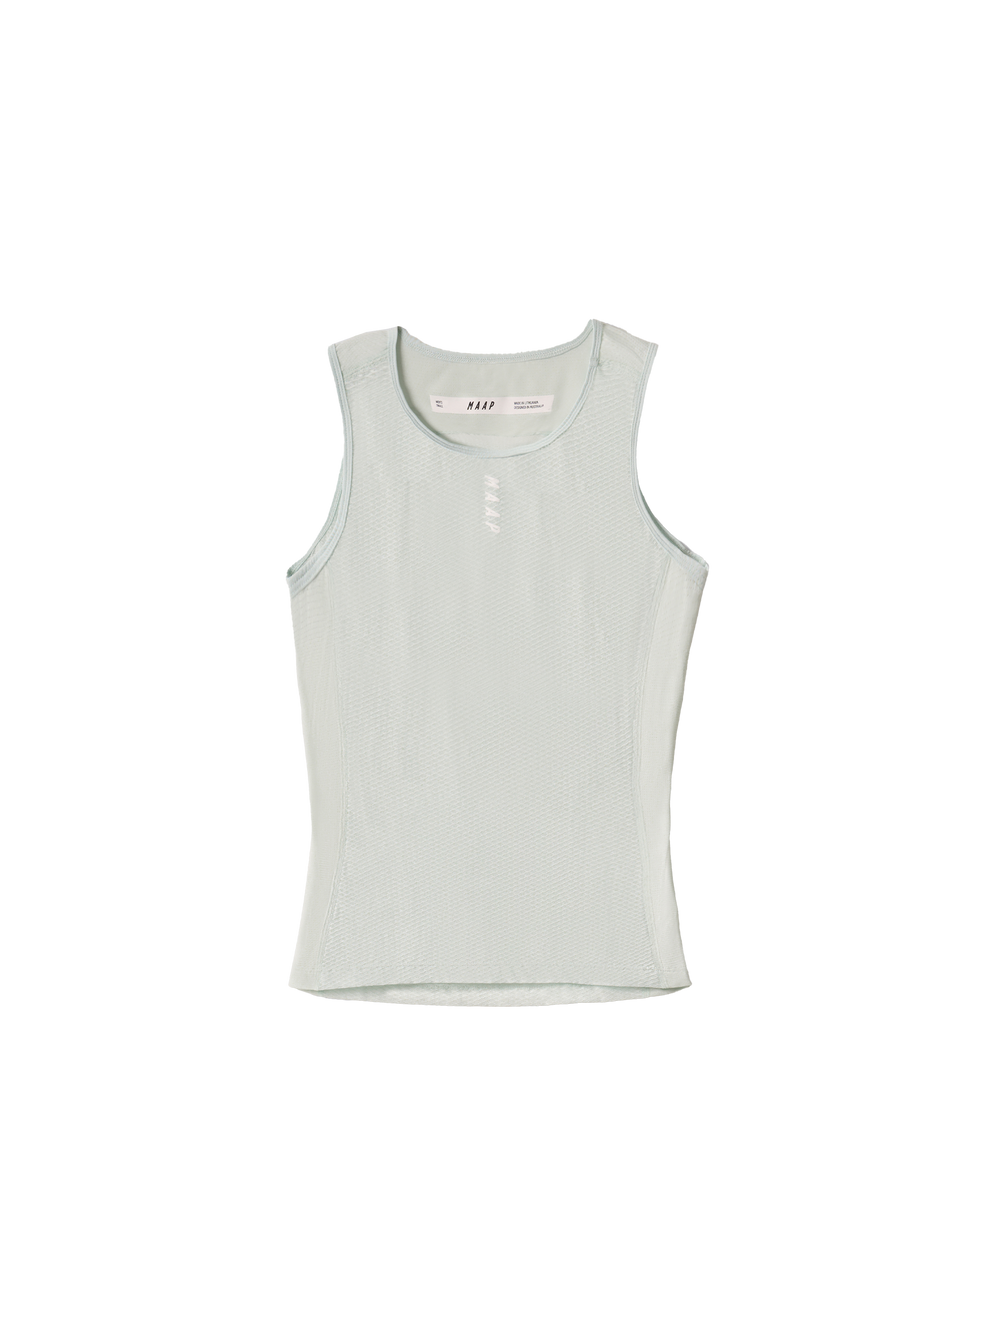 Product Image for Team Base Layer